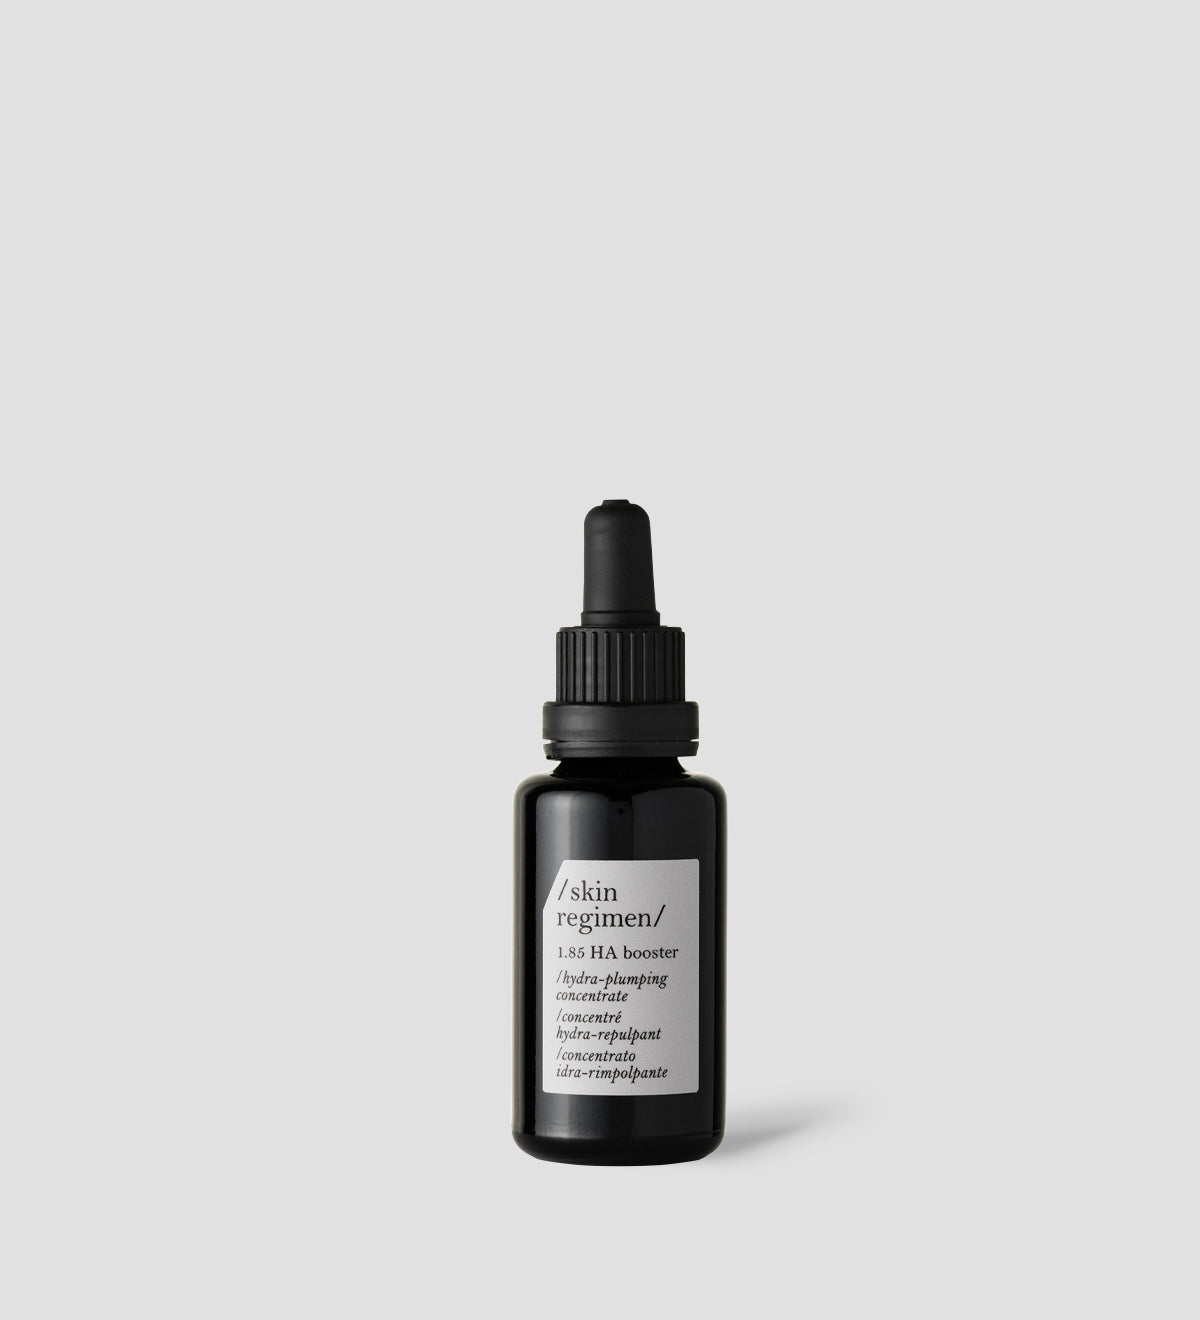 Comfort Zone: SKIN REGIMEN 1.85 HA BOOSTER <p>Hydra-plumping concentrate with hyaluronic acid-